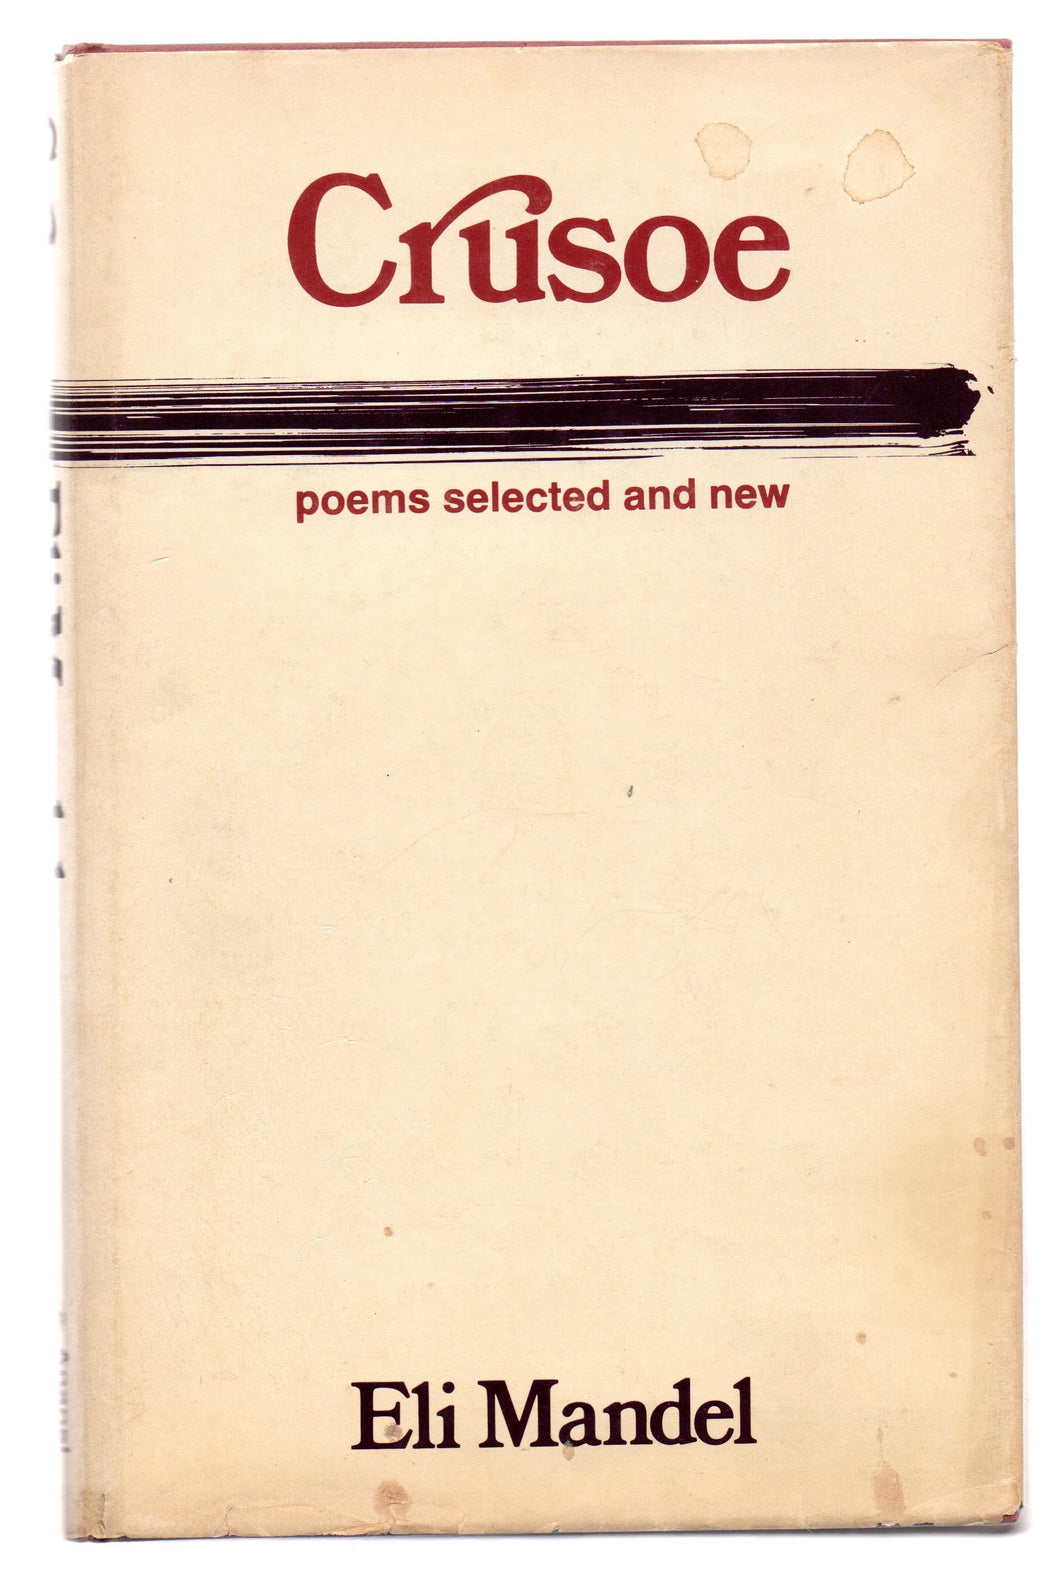 Crusoe: poems selected and new